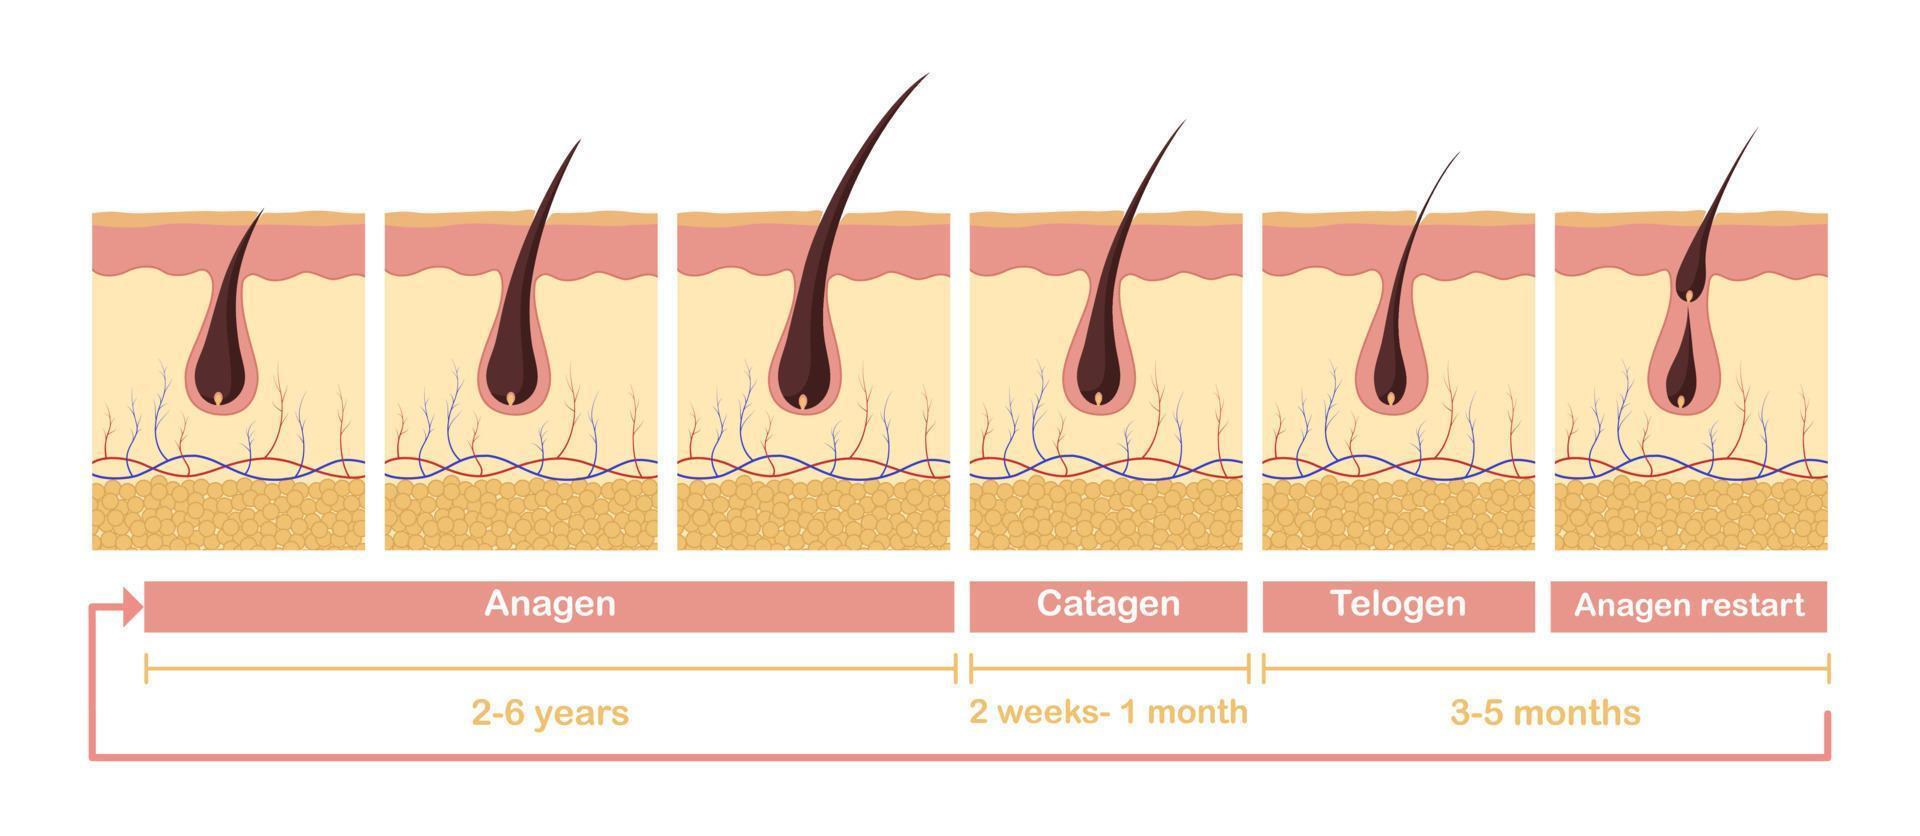 Hair growth cycle illustration. Anatomical diagram of development hair follicles from anagen telagen. vector